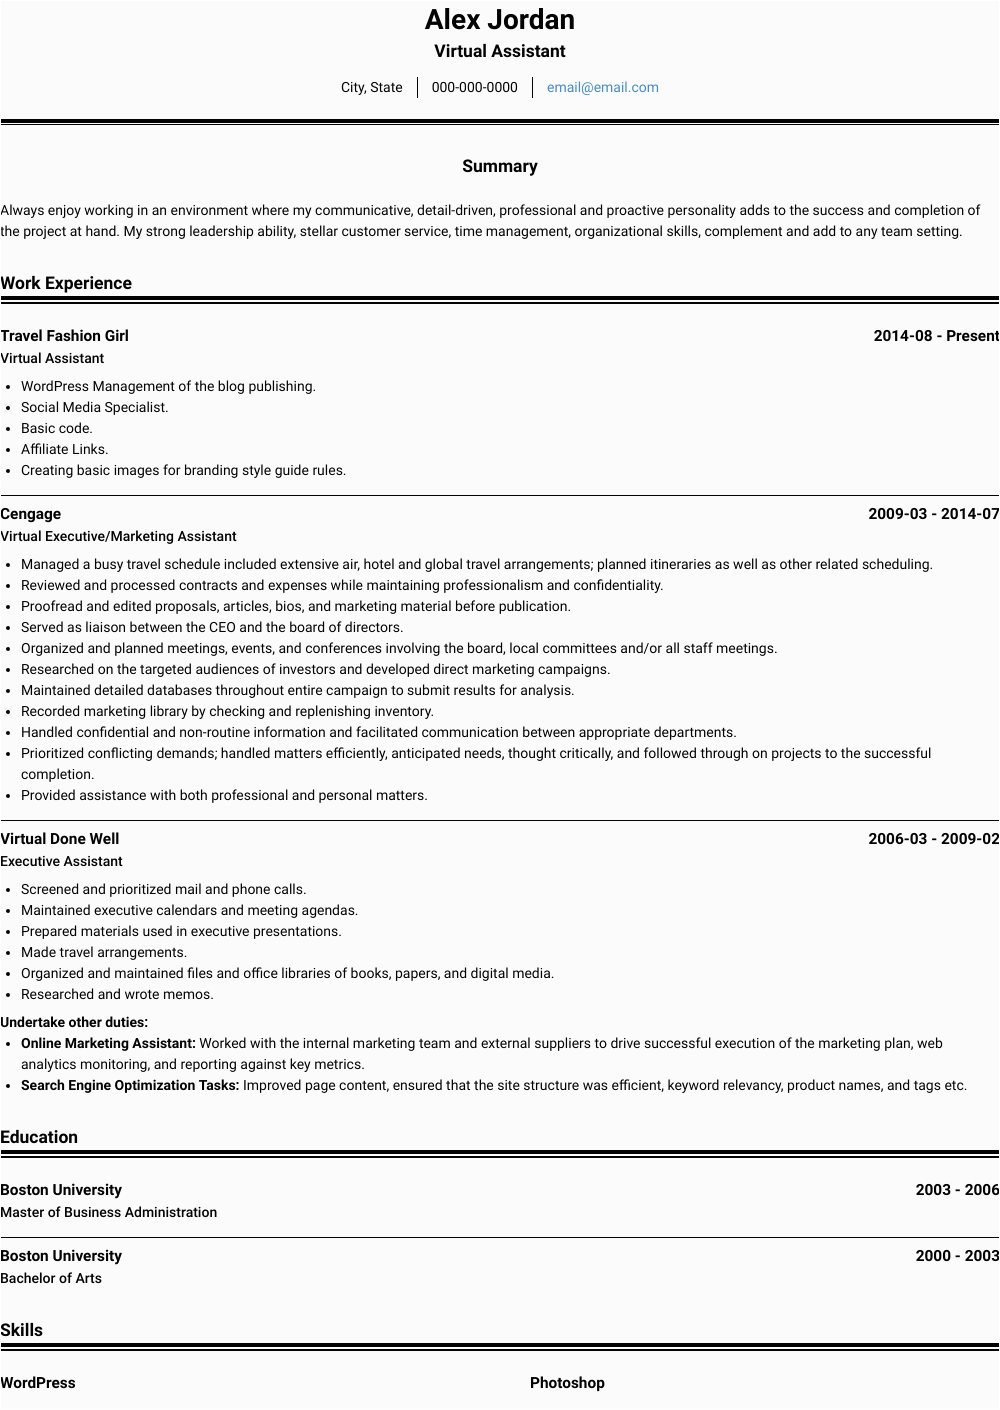 Sample Objectives In Resume for Virtual assistant Virtual assistant Resume Samples and Templates